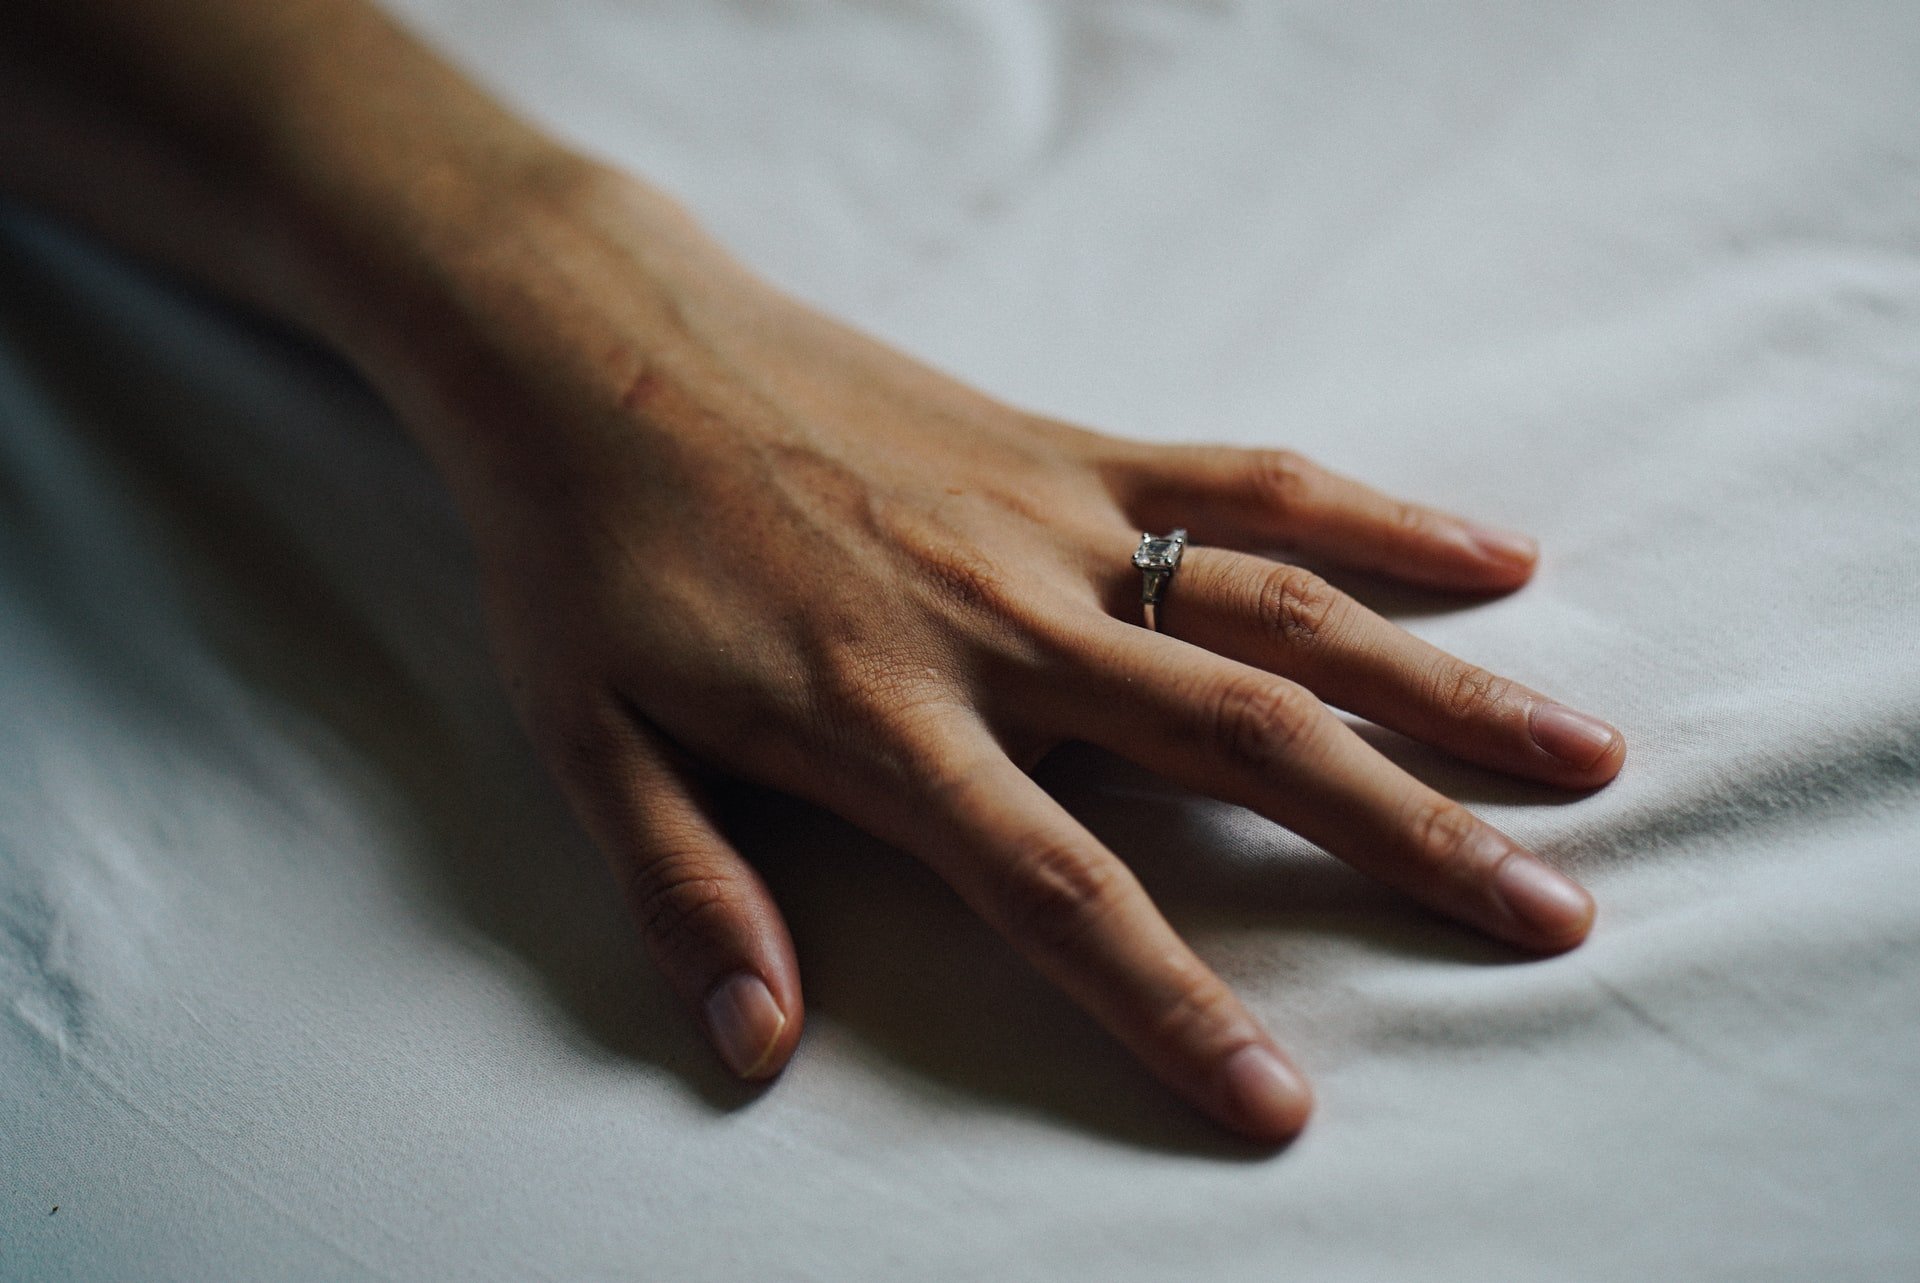 The woman wore her grandmother's ring | Source: Unsplash